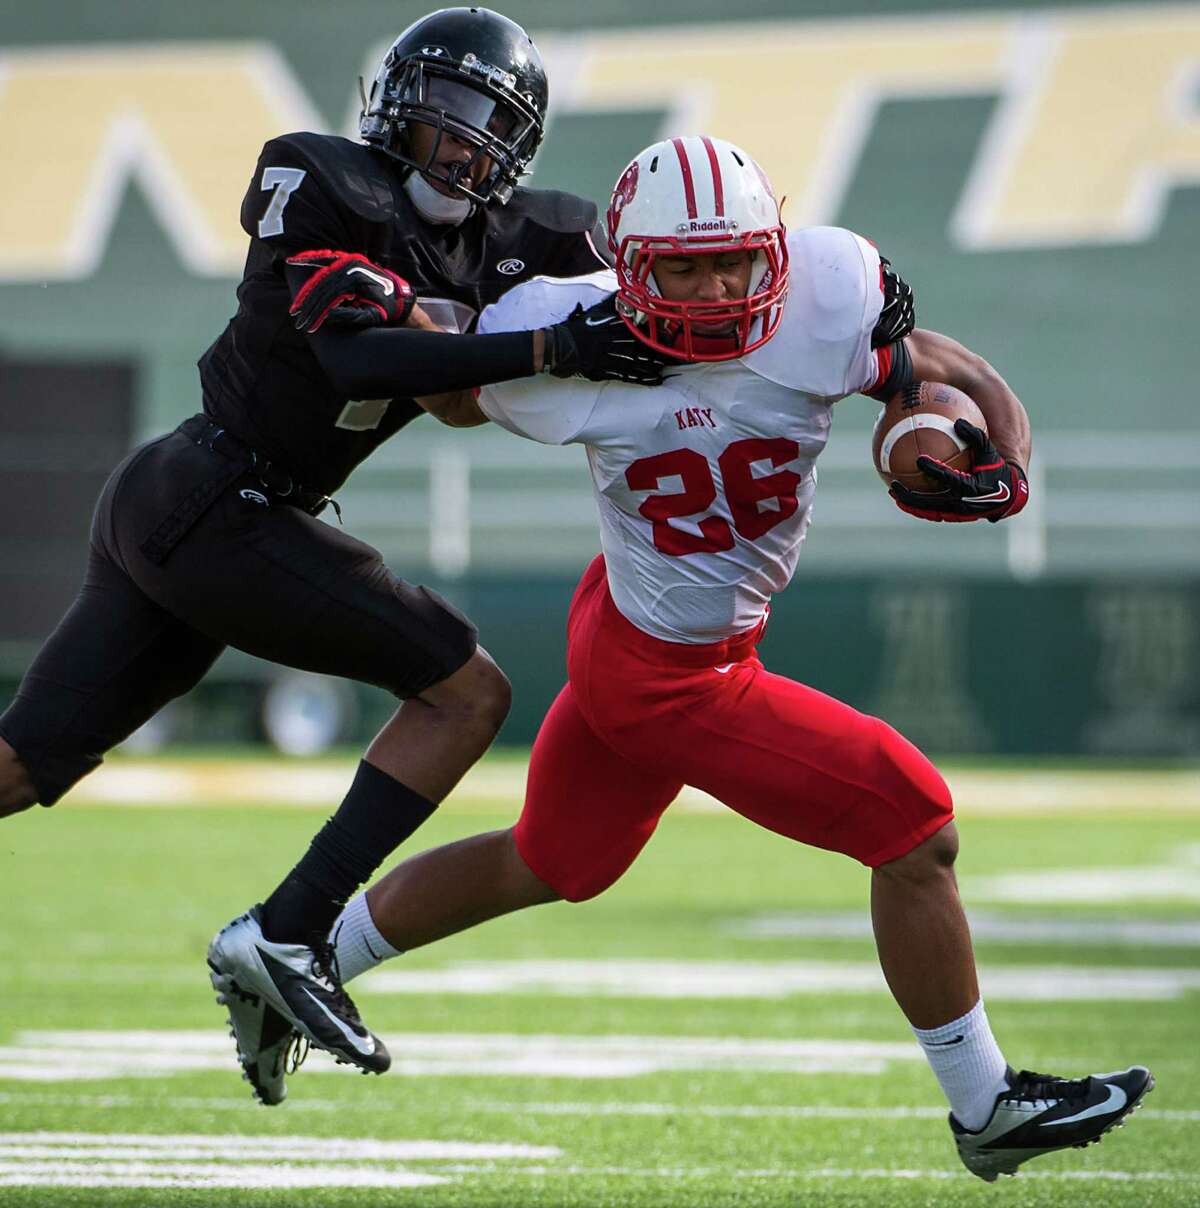 Katy running back Rodney Anderson (26) is tackled by Cibolo Steele defensive back Carl Cunningham (7) during the first quarter in a Class 5A Division II state high school football semifinal game at Floyd Casey Stadium on Saturday, Dec. 15, 2012, in Waco. ( Smiley N. Pool / Houston Chronicle )